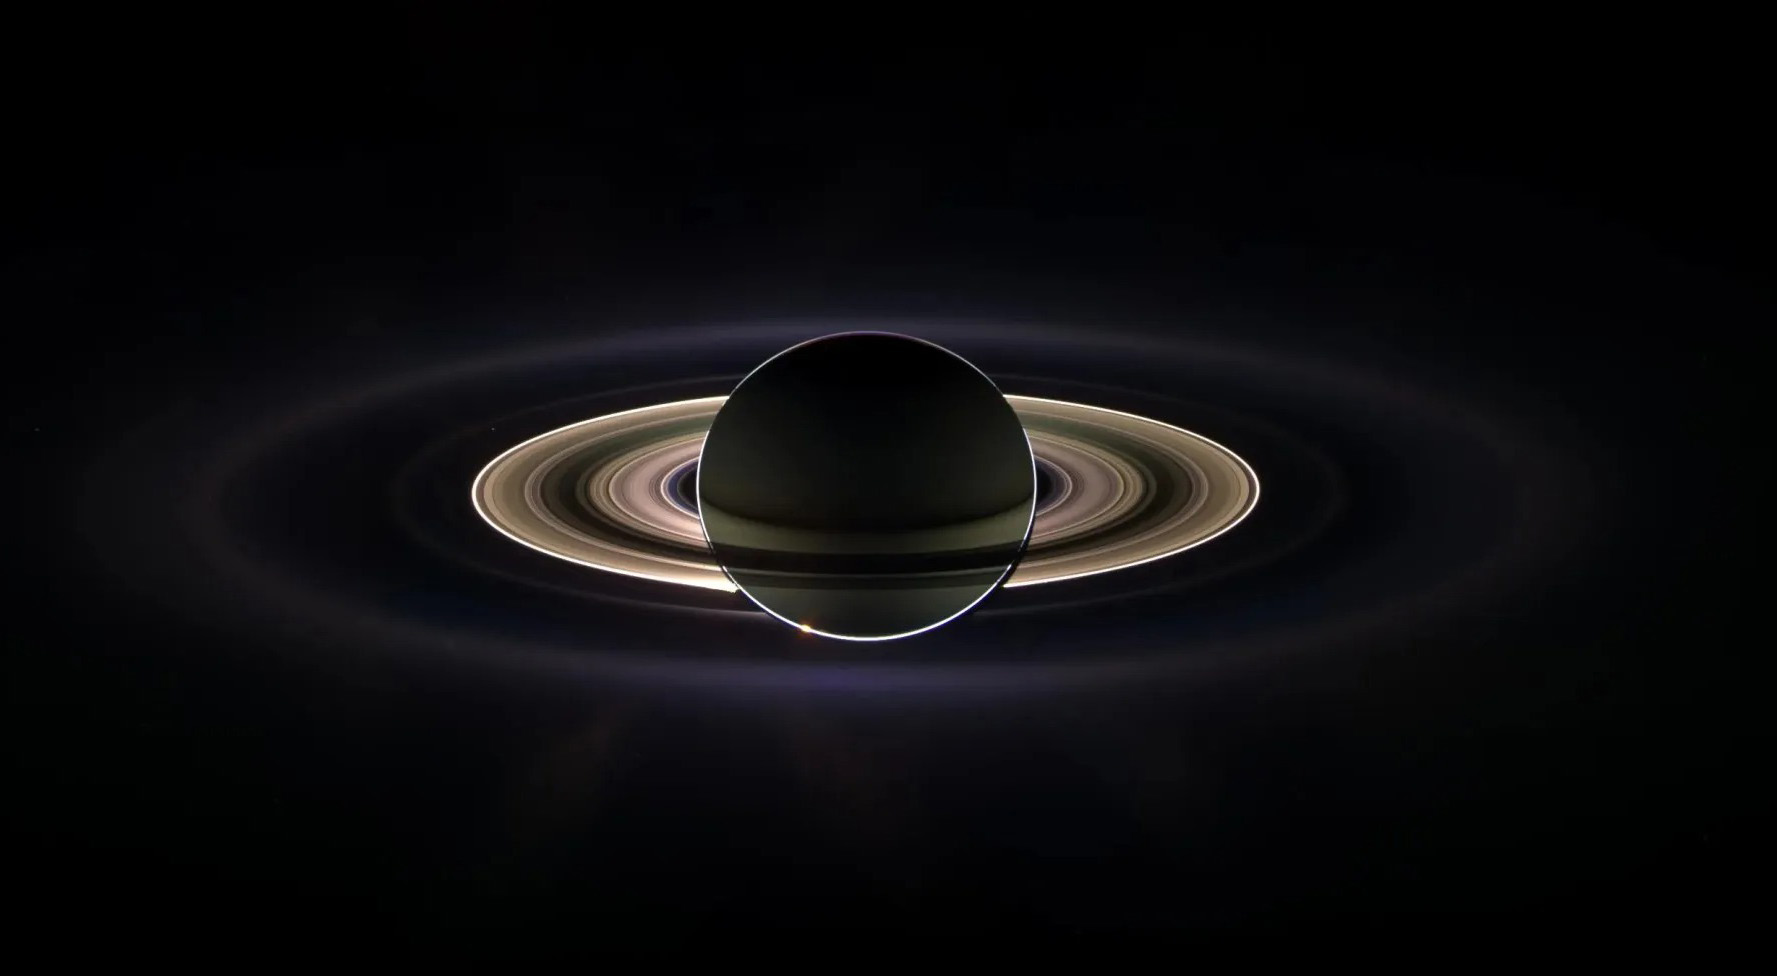 In the recording, Saturn’s new, invisible ring system becomes visible